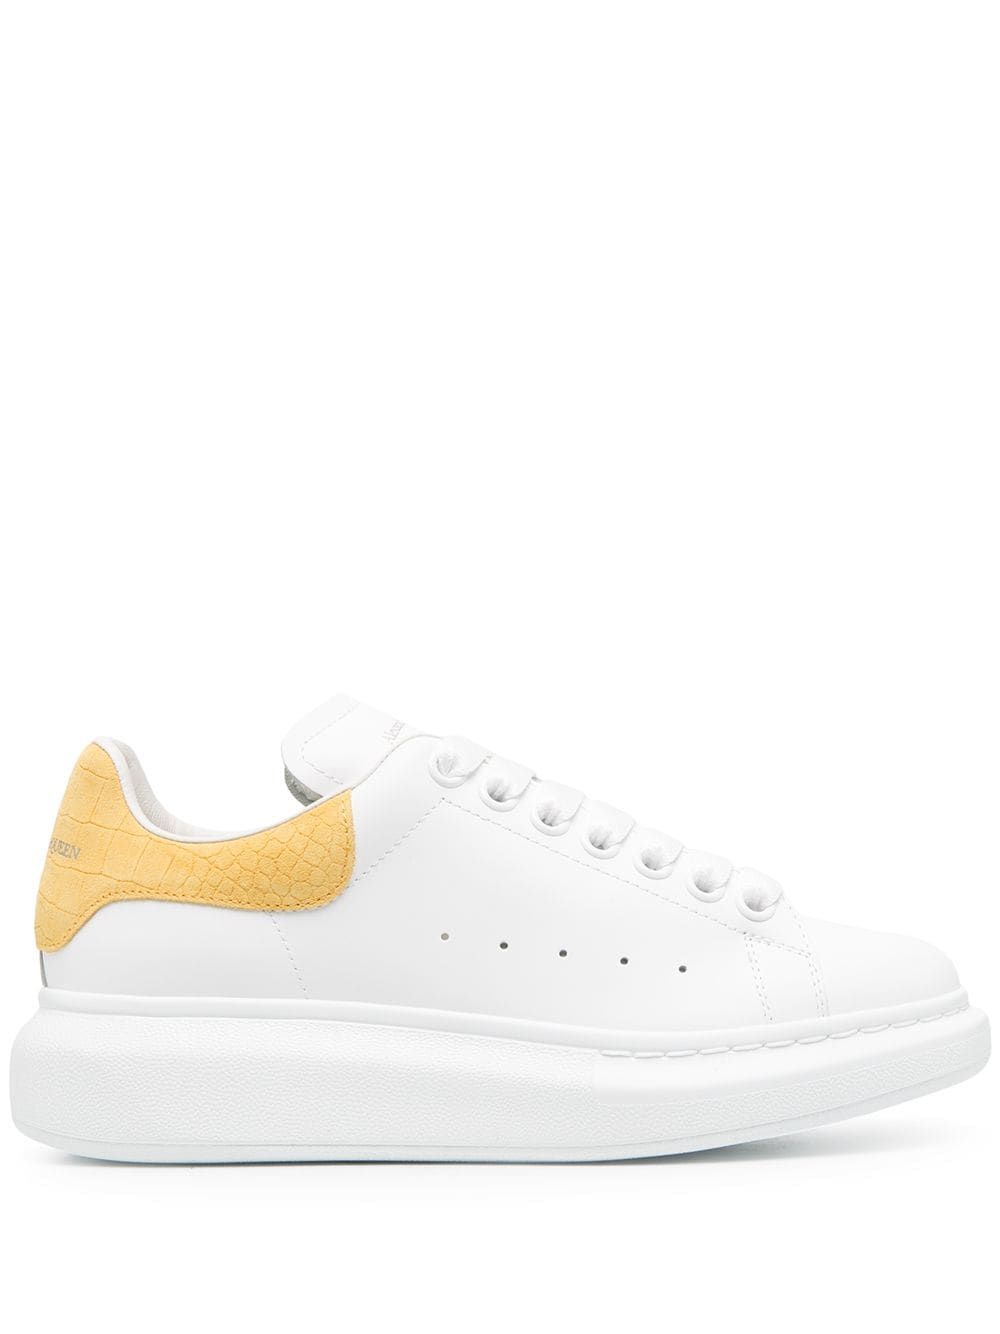 SNEAKERS ALEXANDER MCQUEEN, LEATHER 100%, color WHITE, Rubber sole, SS21, product code 650788WHZ4K9718